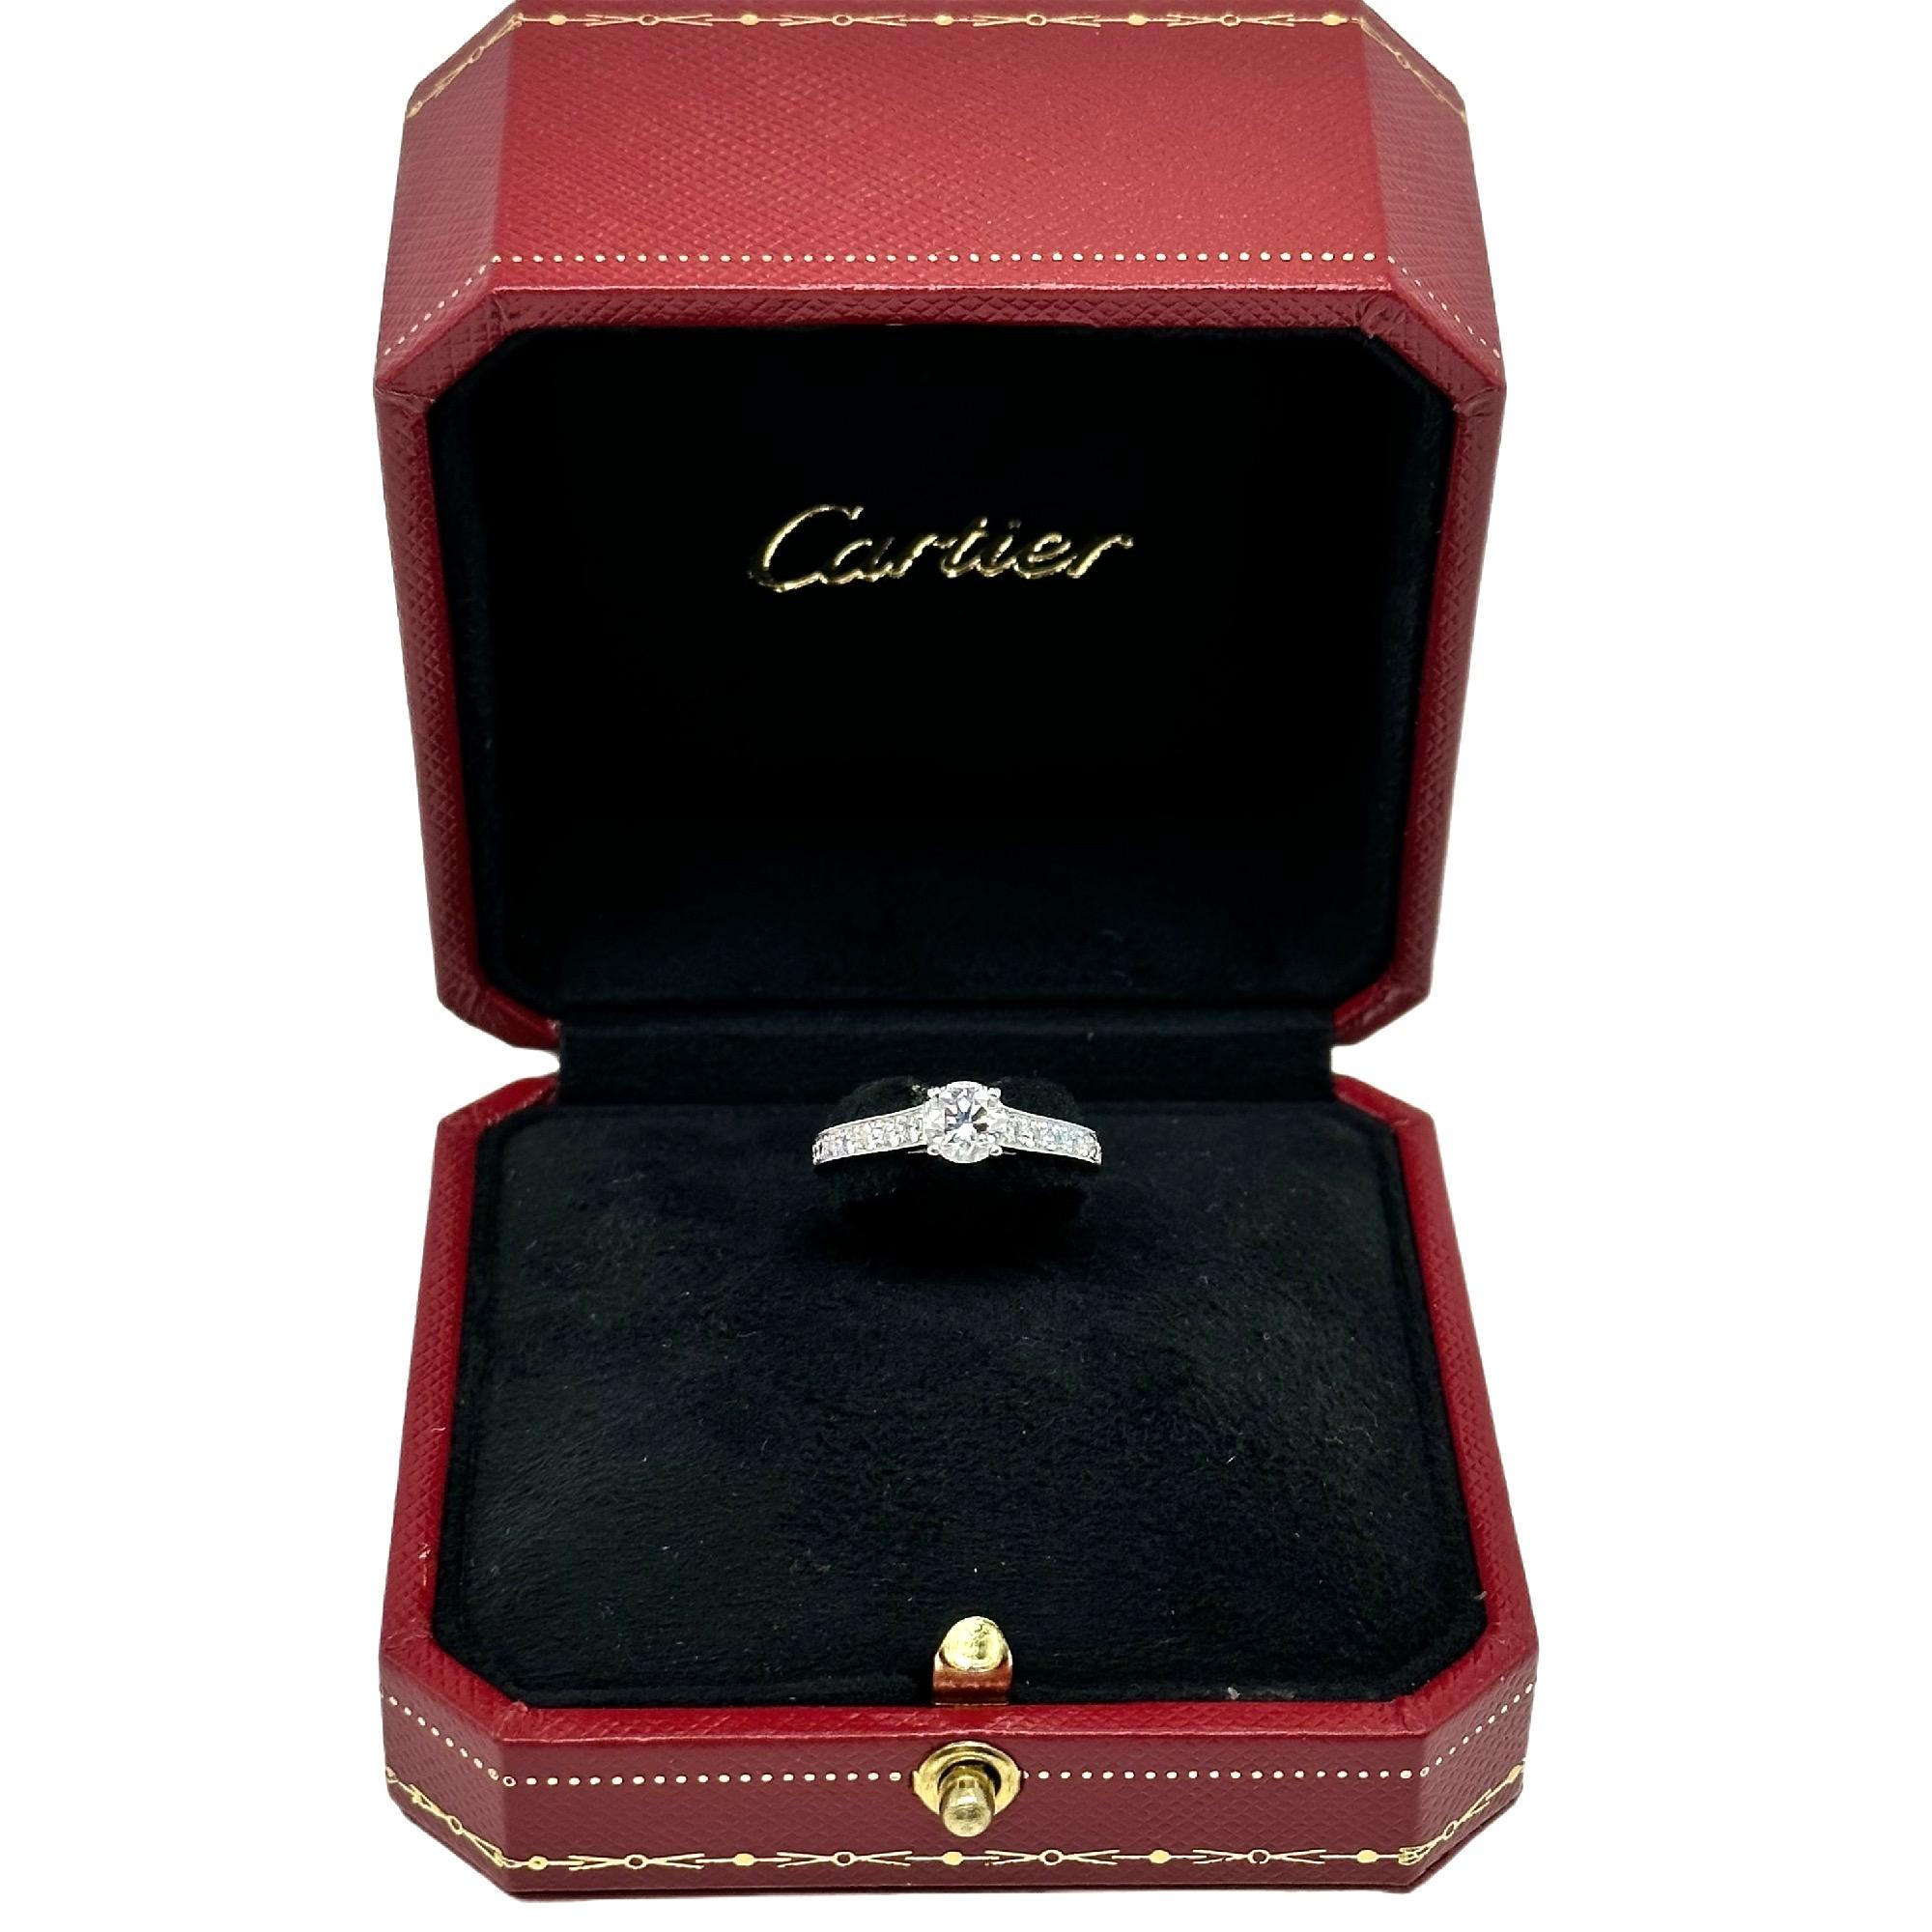 Cartier 1895 Round Diamond 0.88 tcw Engagement Ring in Platinum GIA COA Box For Sale 1